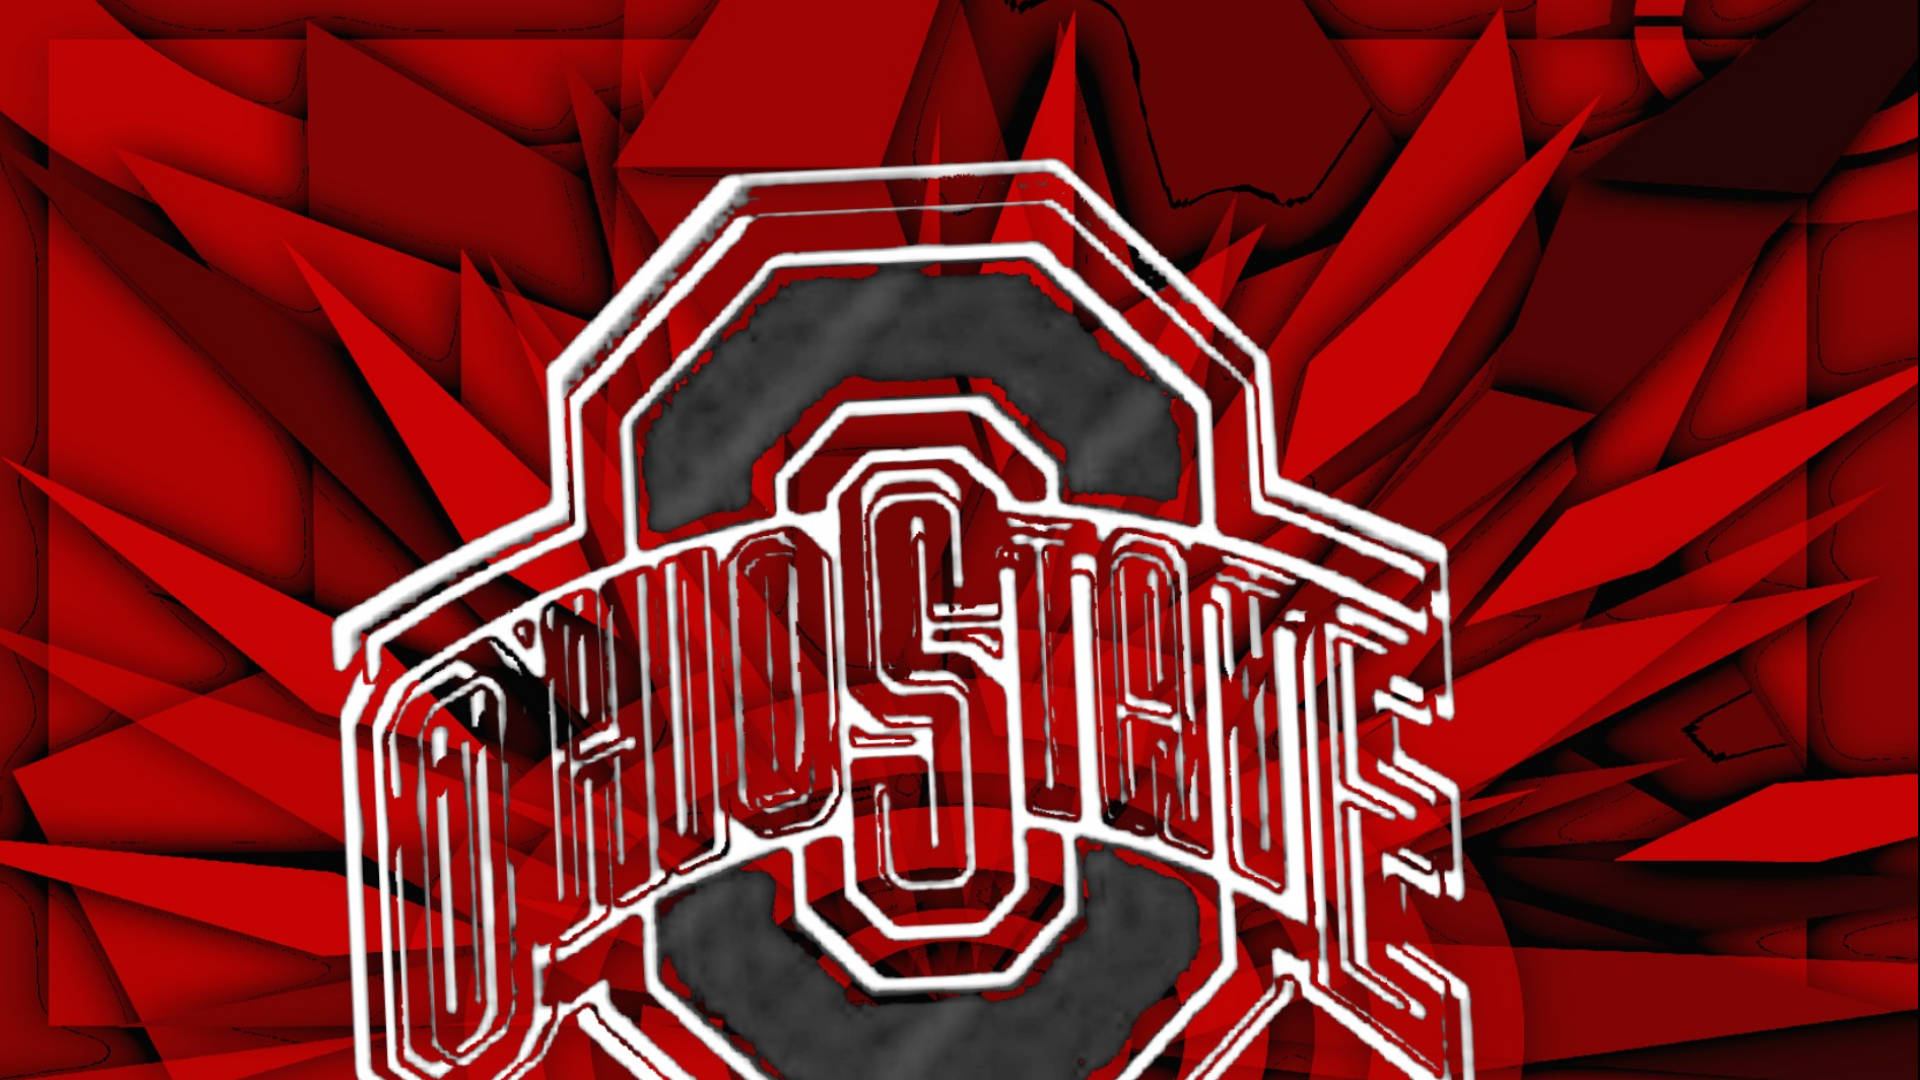 40 Ohio State Wallpapers & Backgrounds